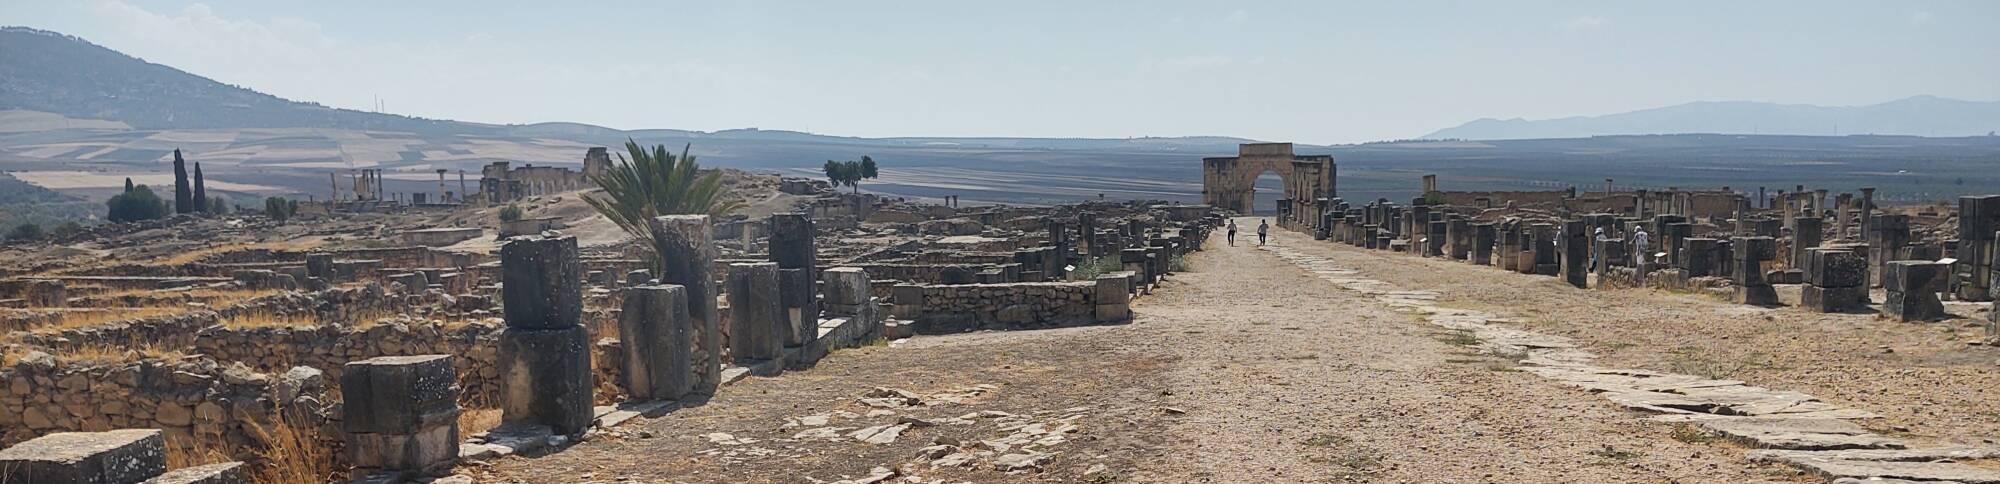 Panorama of the ancient site of Volubilis: basilica, triumphal arch, and the surrounding agricultural plain.